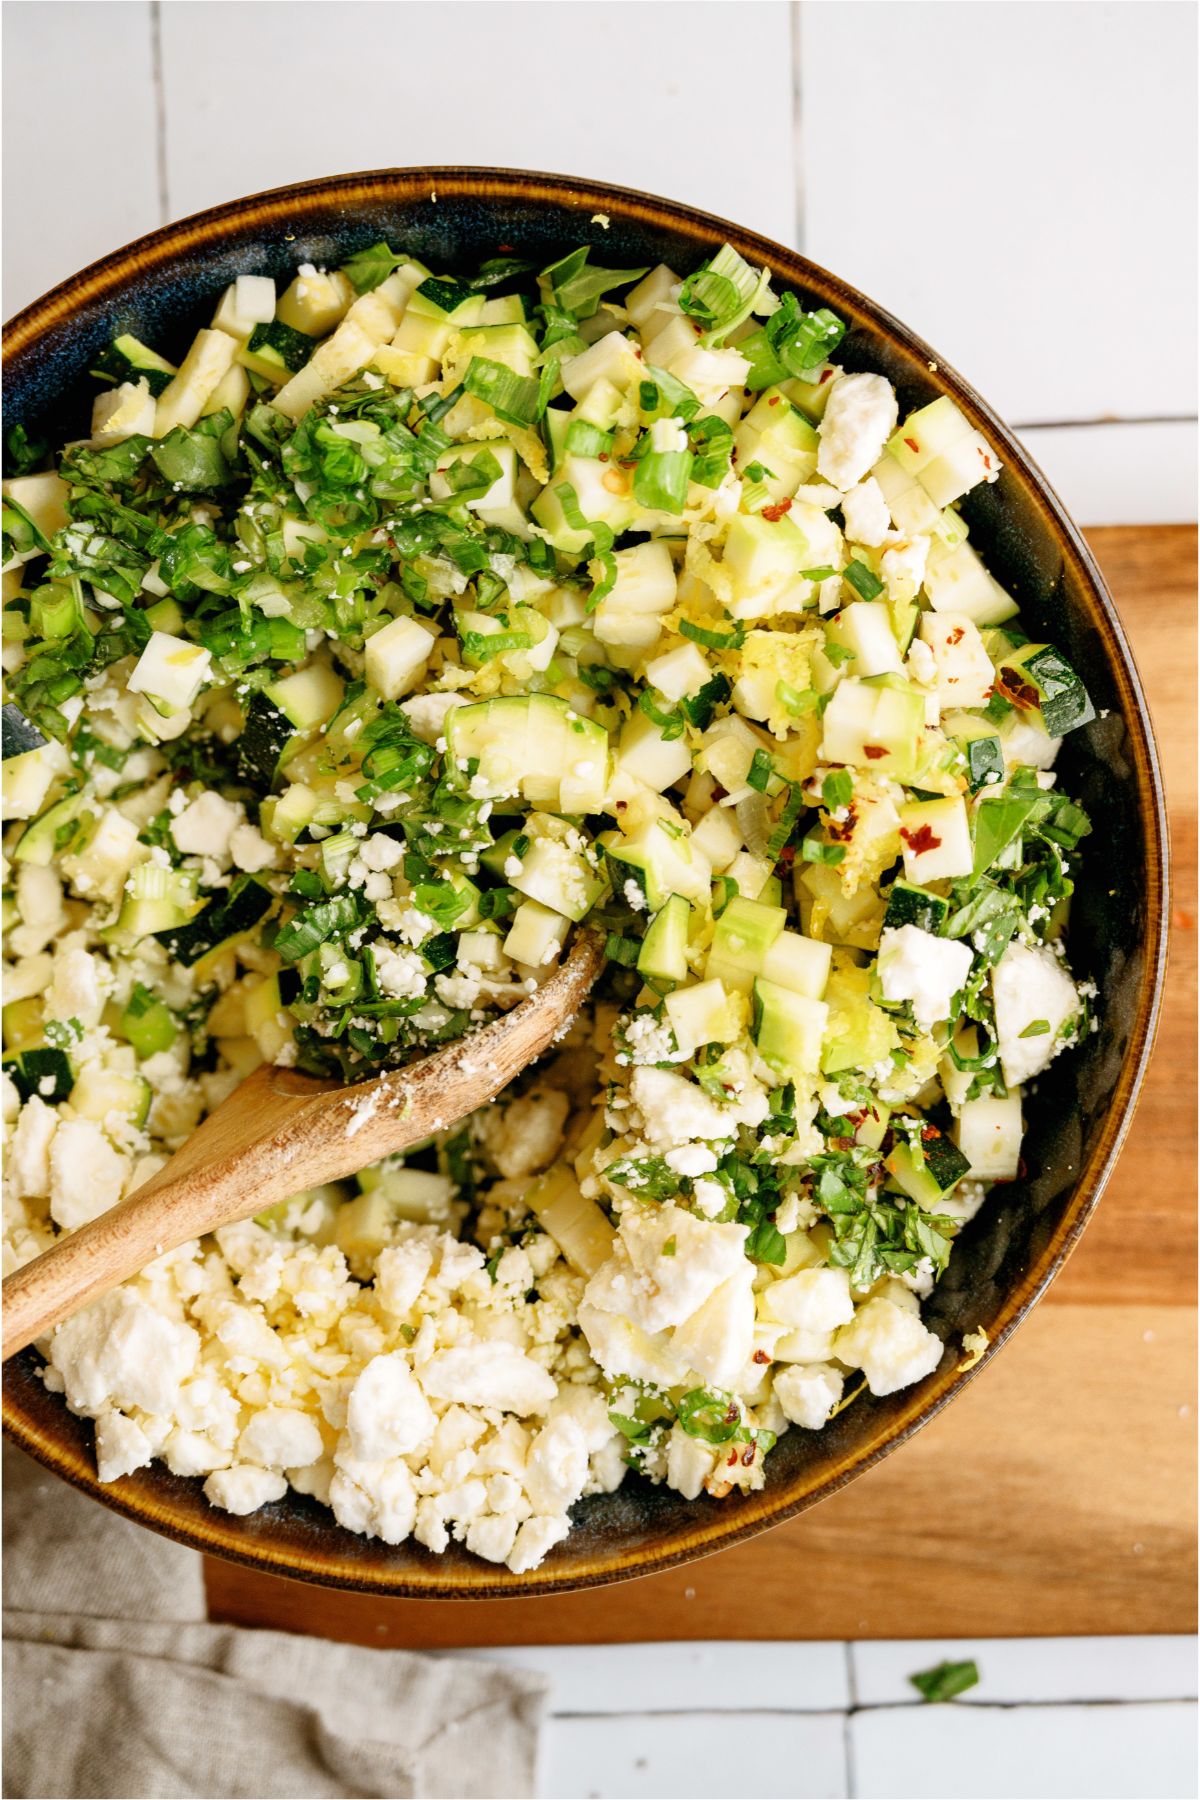 Mixing ingredients for Zucchini Feta Bruschetta in a large bowl